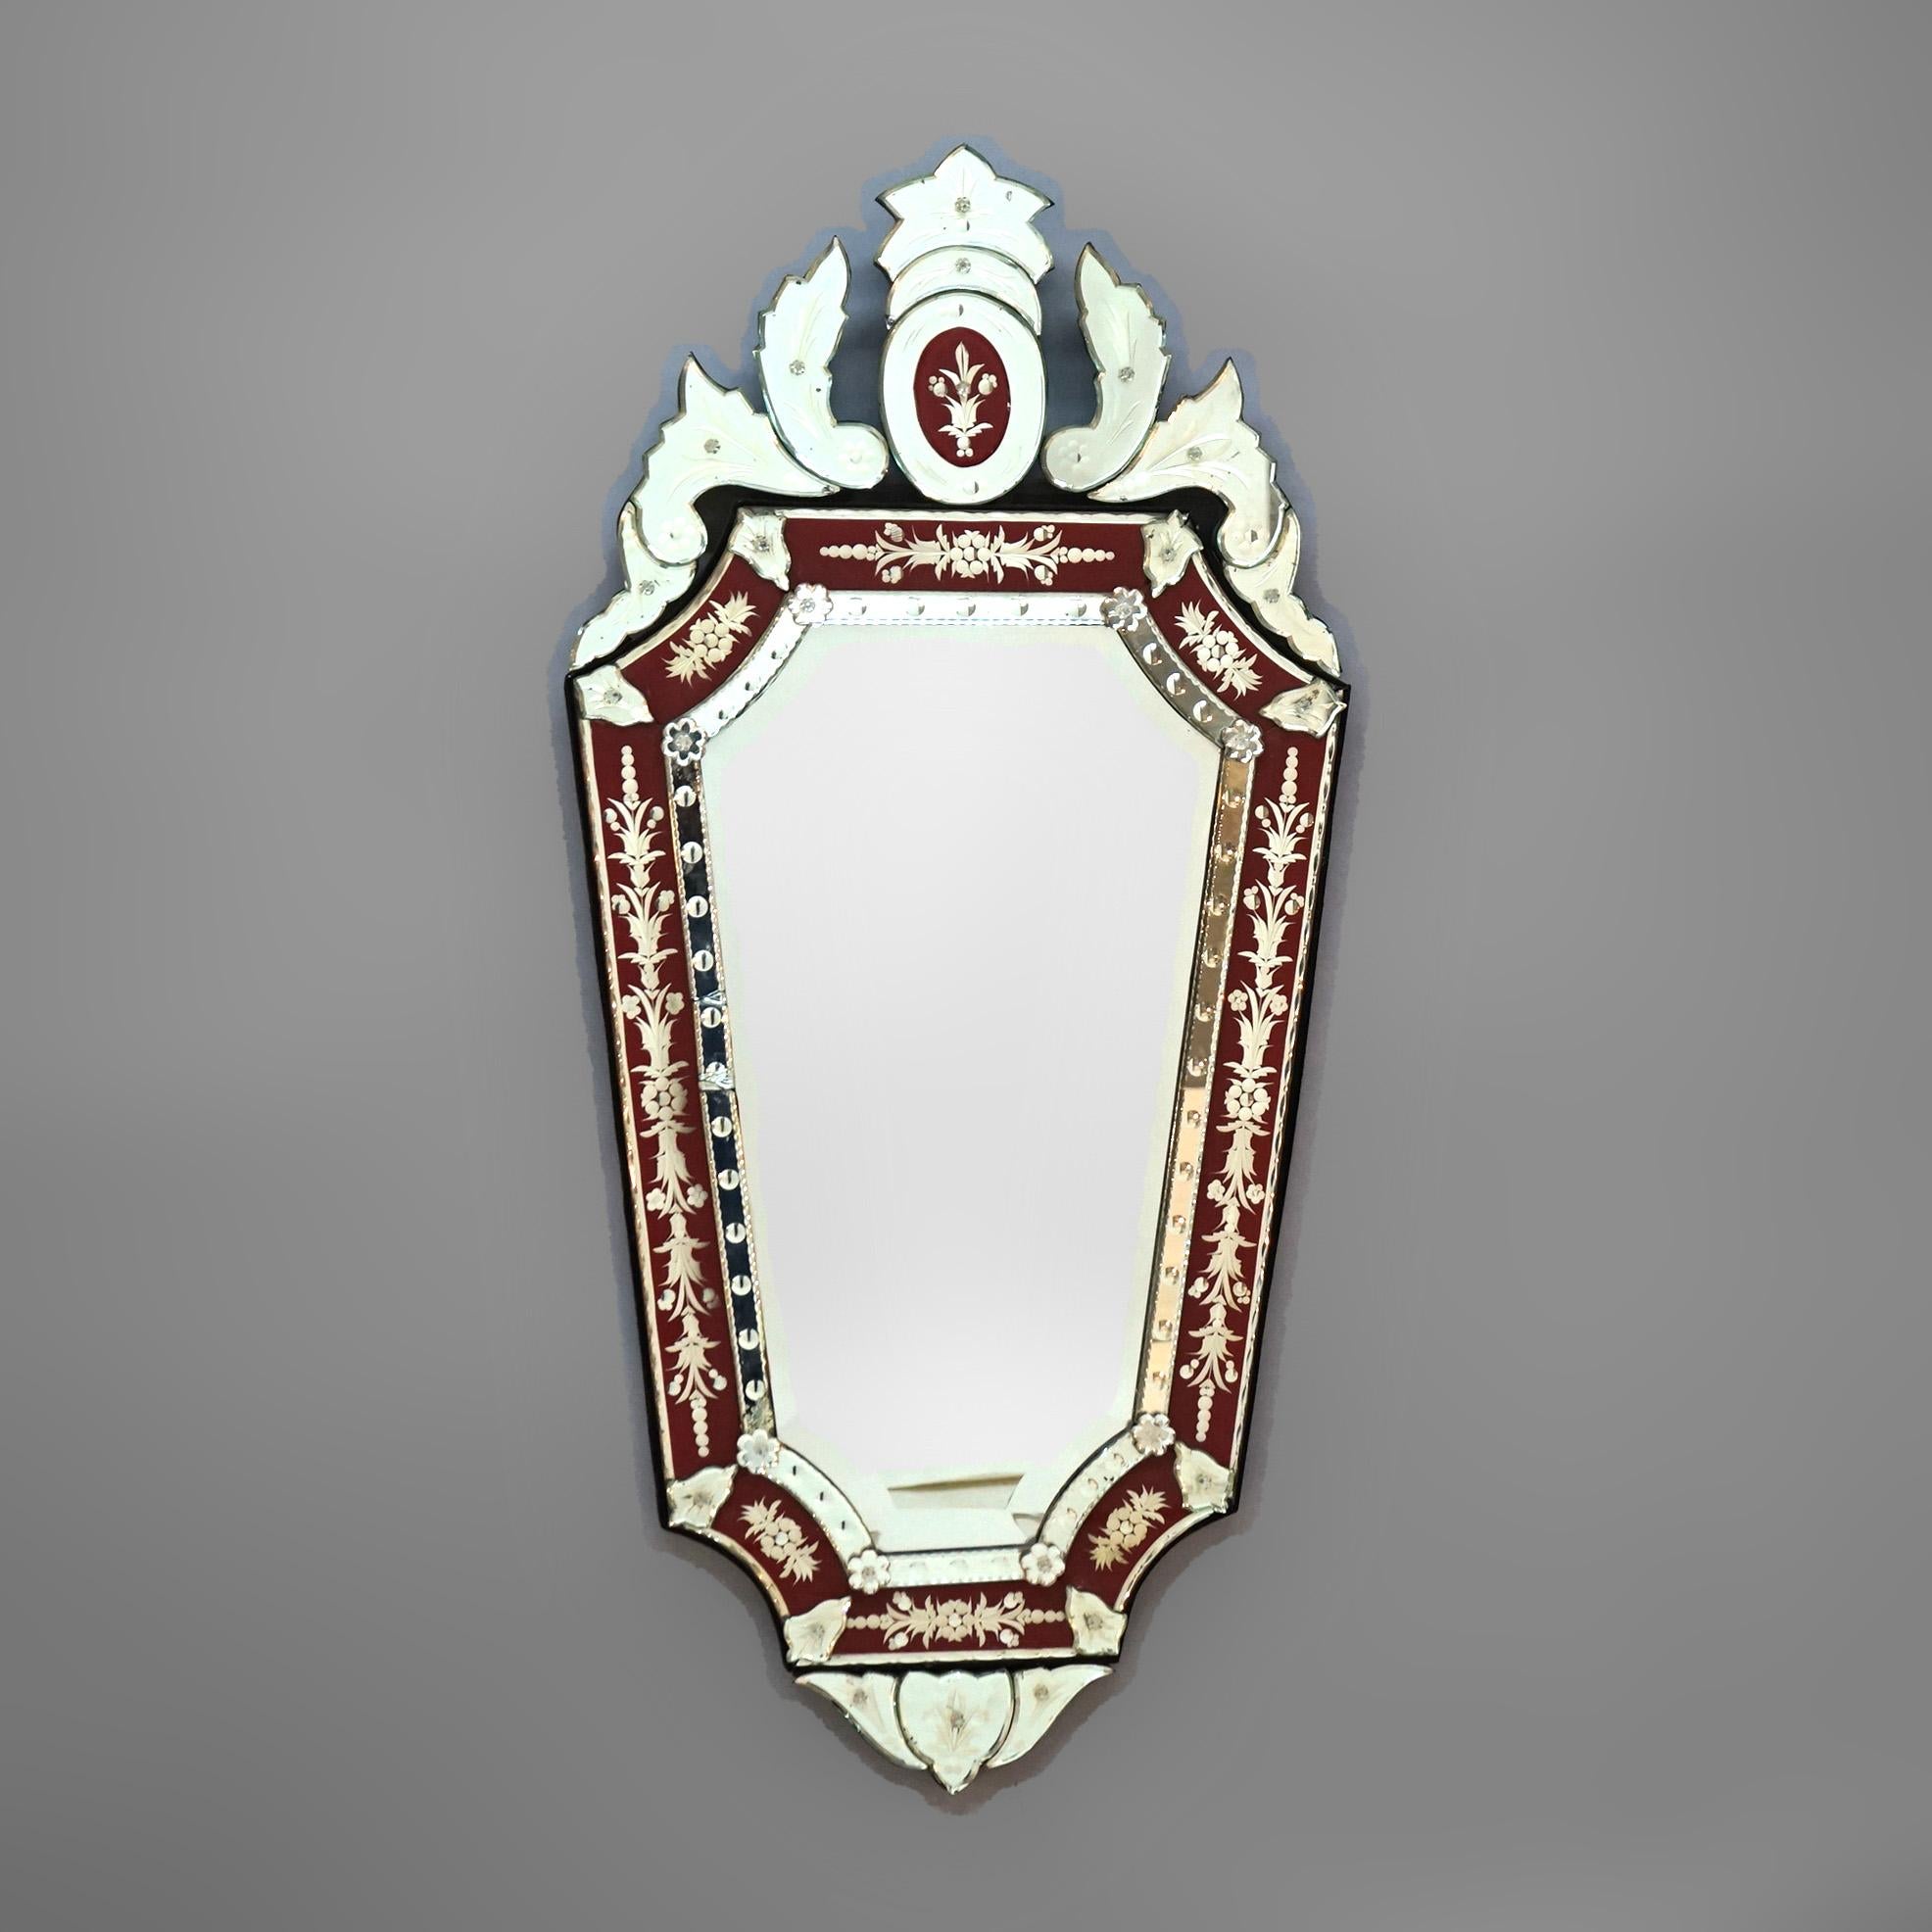 A Venetian Italian Renaissance wall mirror offers stylized shield form with a foliate form crest over polychrome and etched glass mirror, 20th century

Measures - 48